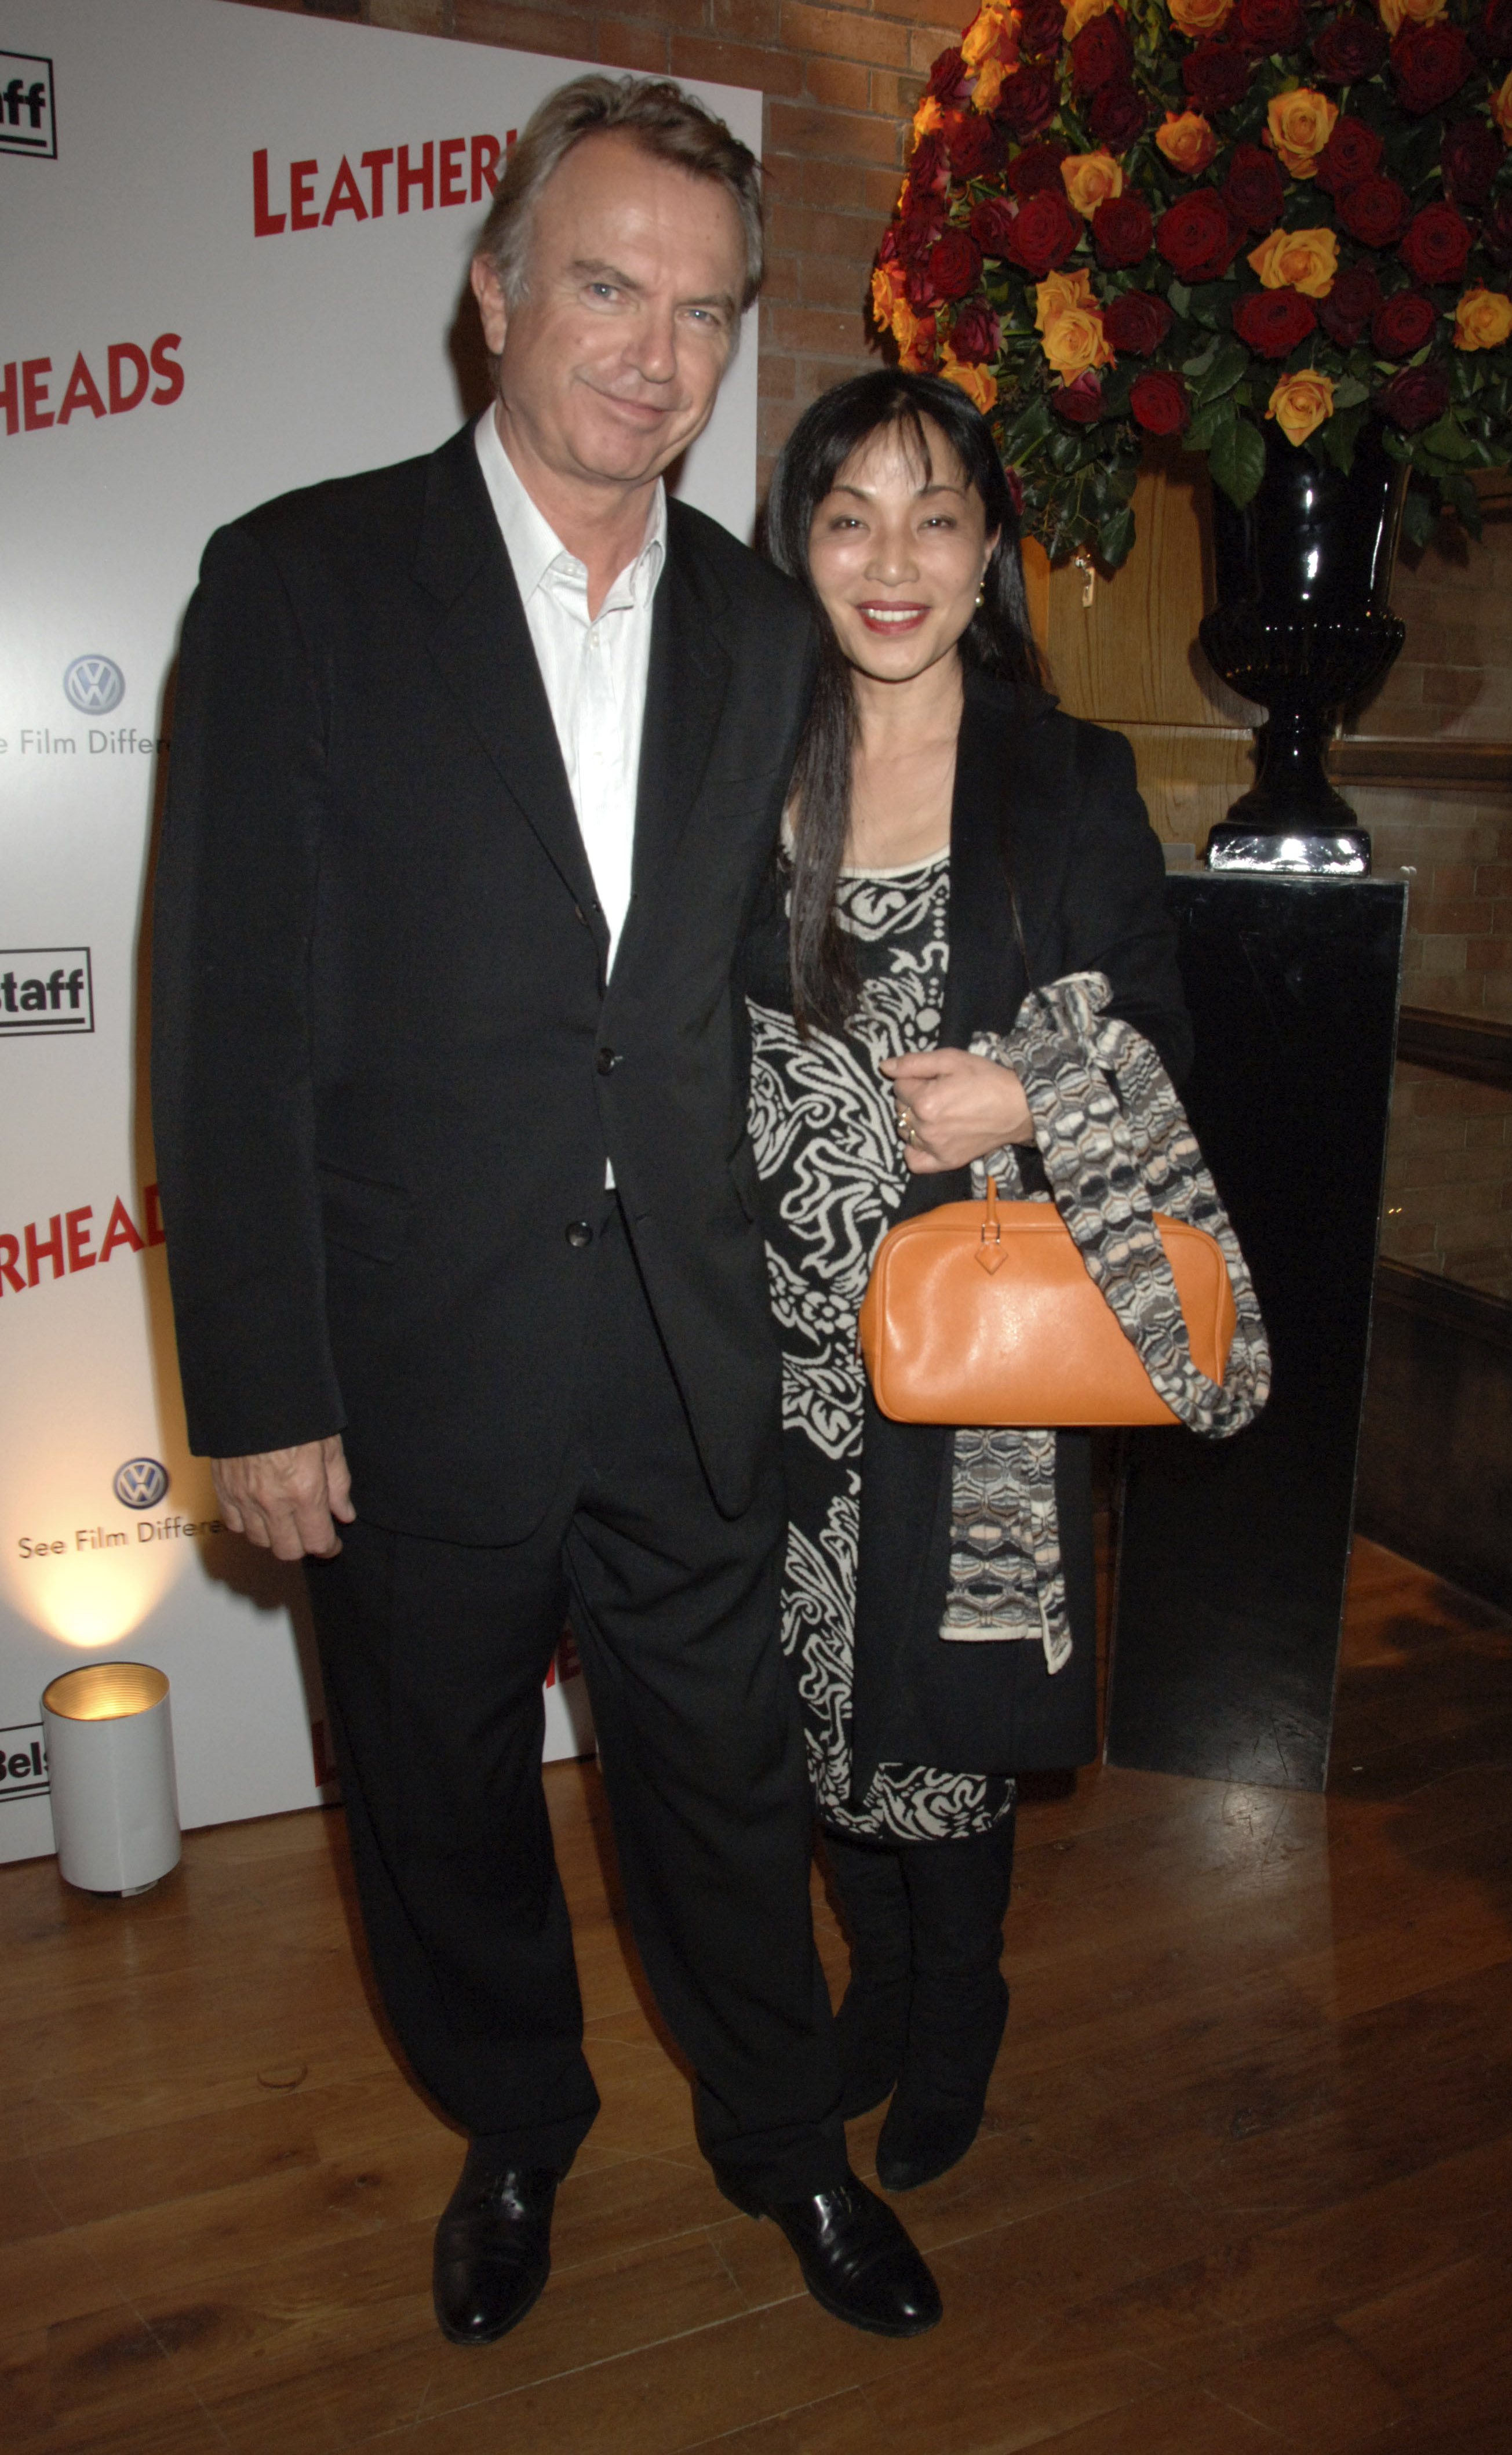 Sam Neill and Noriko Watanabe attend the afterparty following the European Premiere of "Leatherheads" at Automat on April 8, 2008, in London, England. | Source: Getty Images